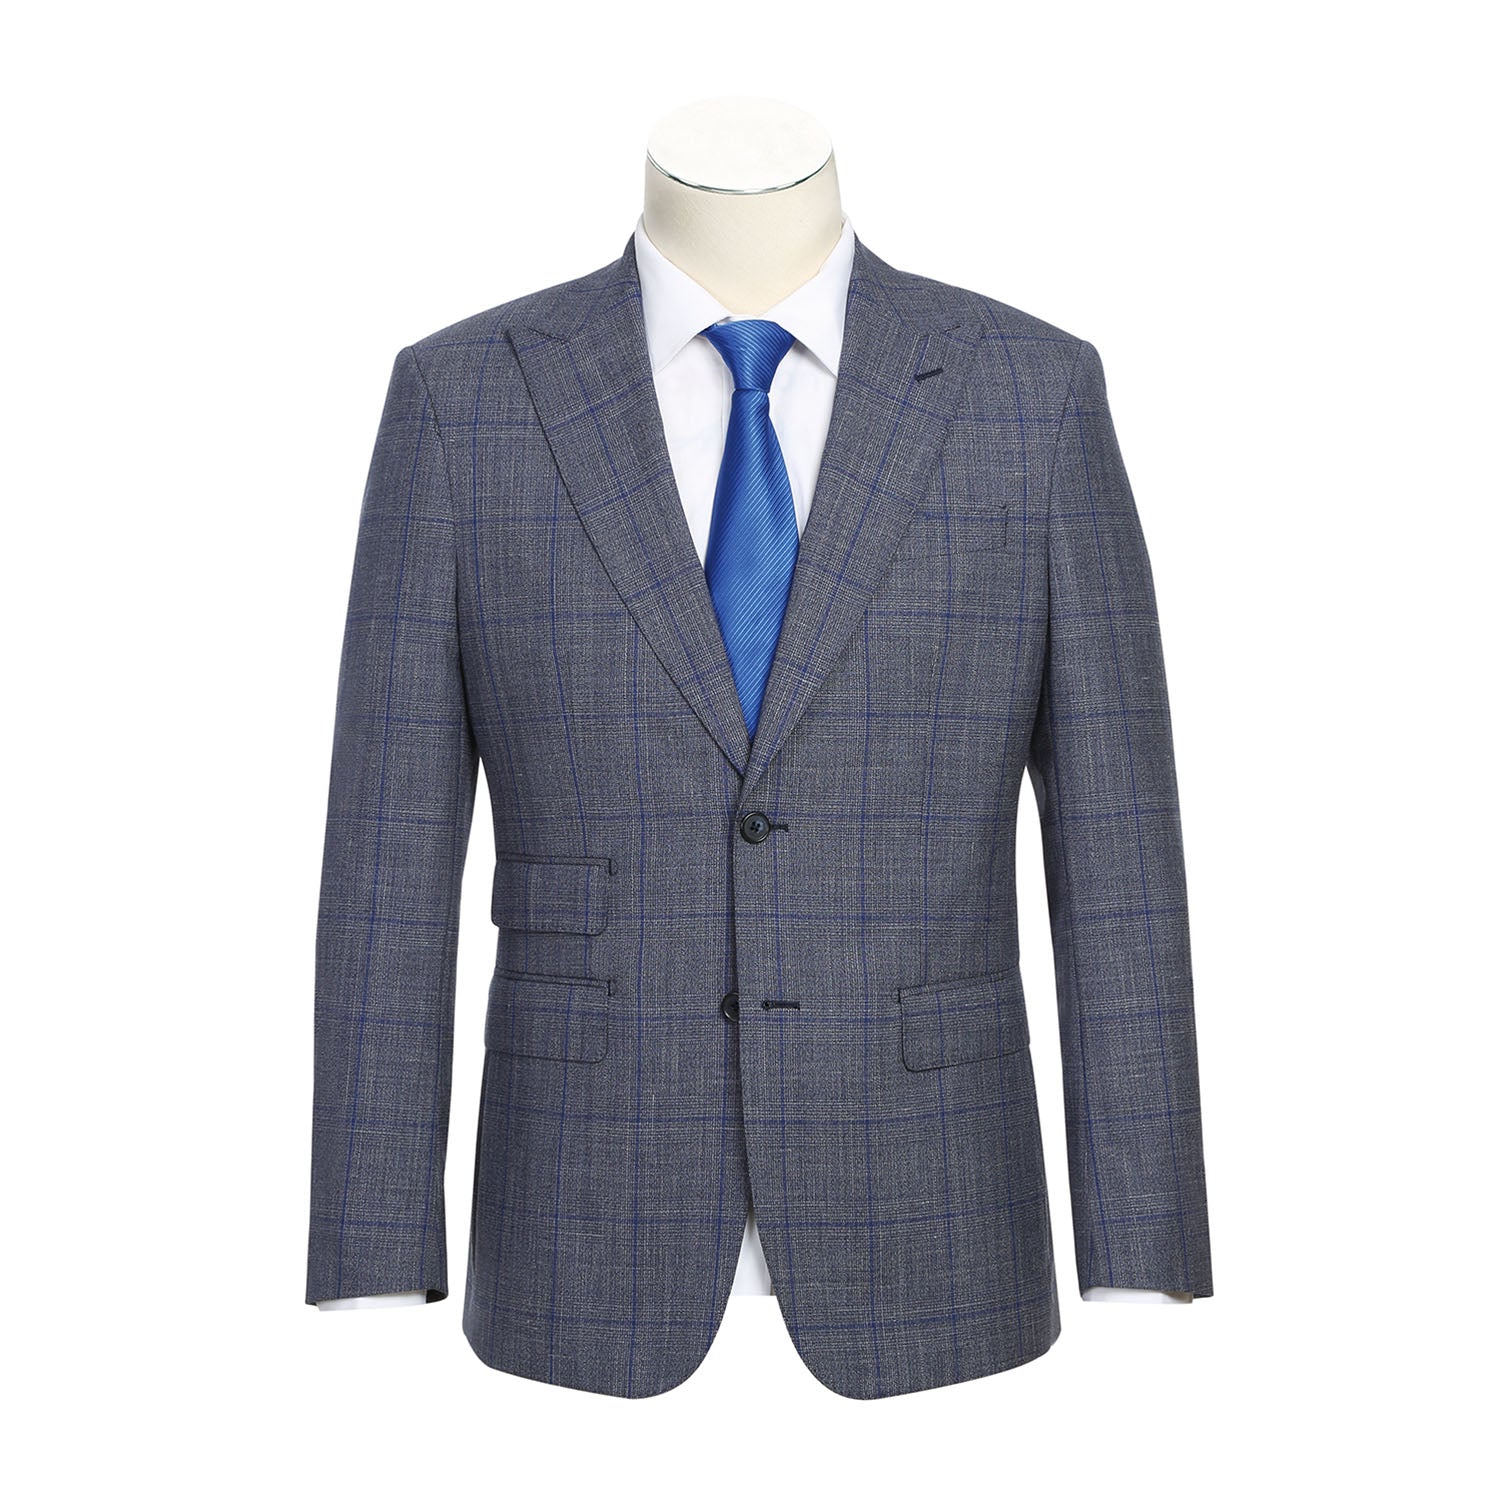 English Laundry Gray with Blue Windowpane Wool Suit